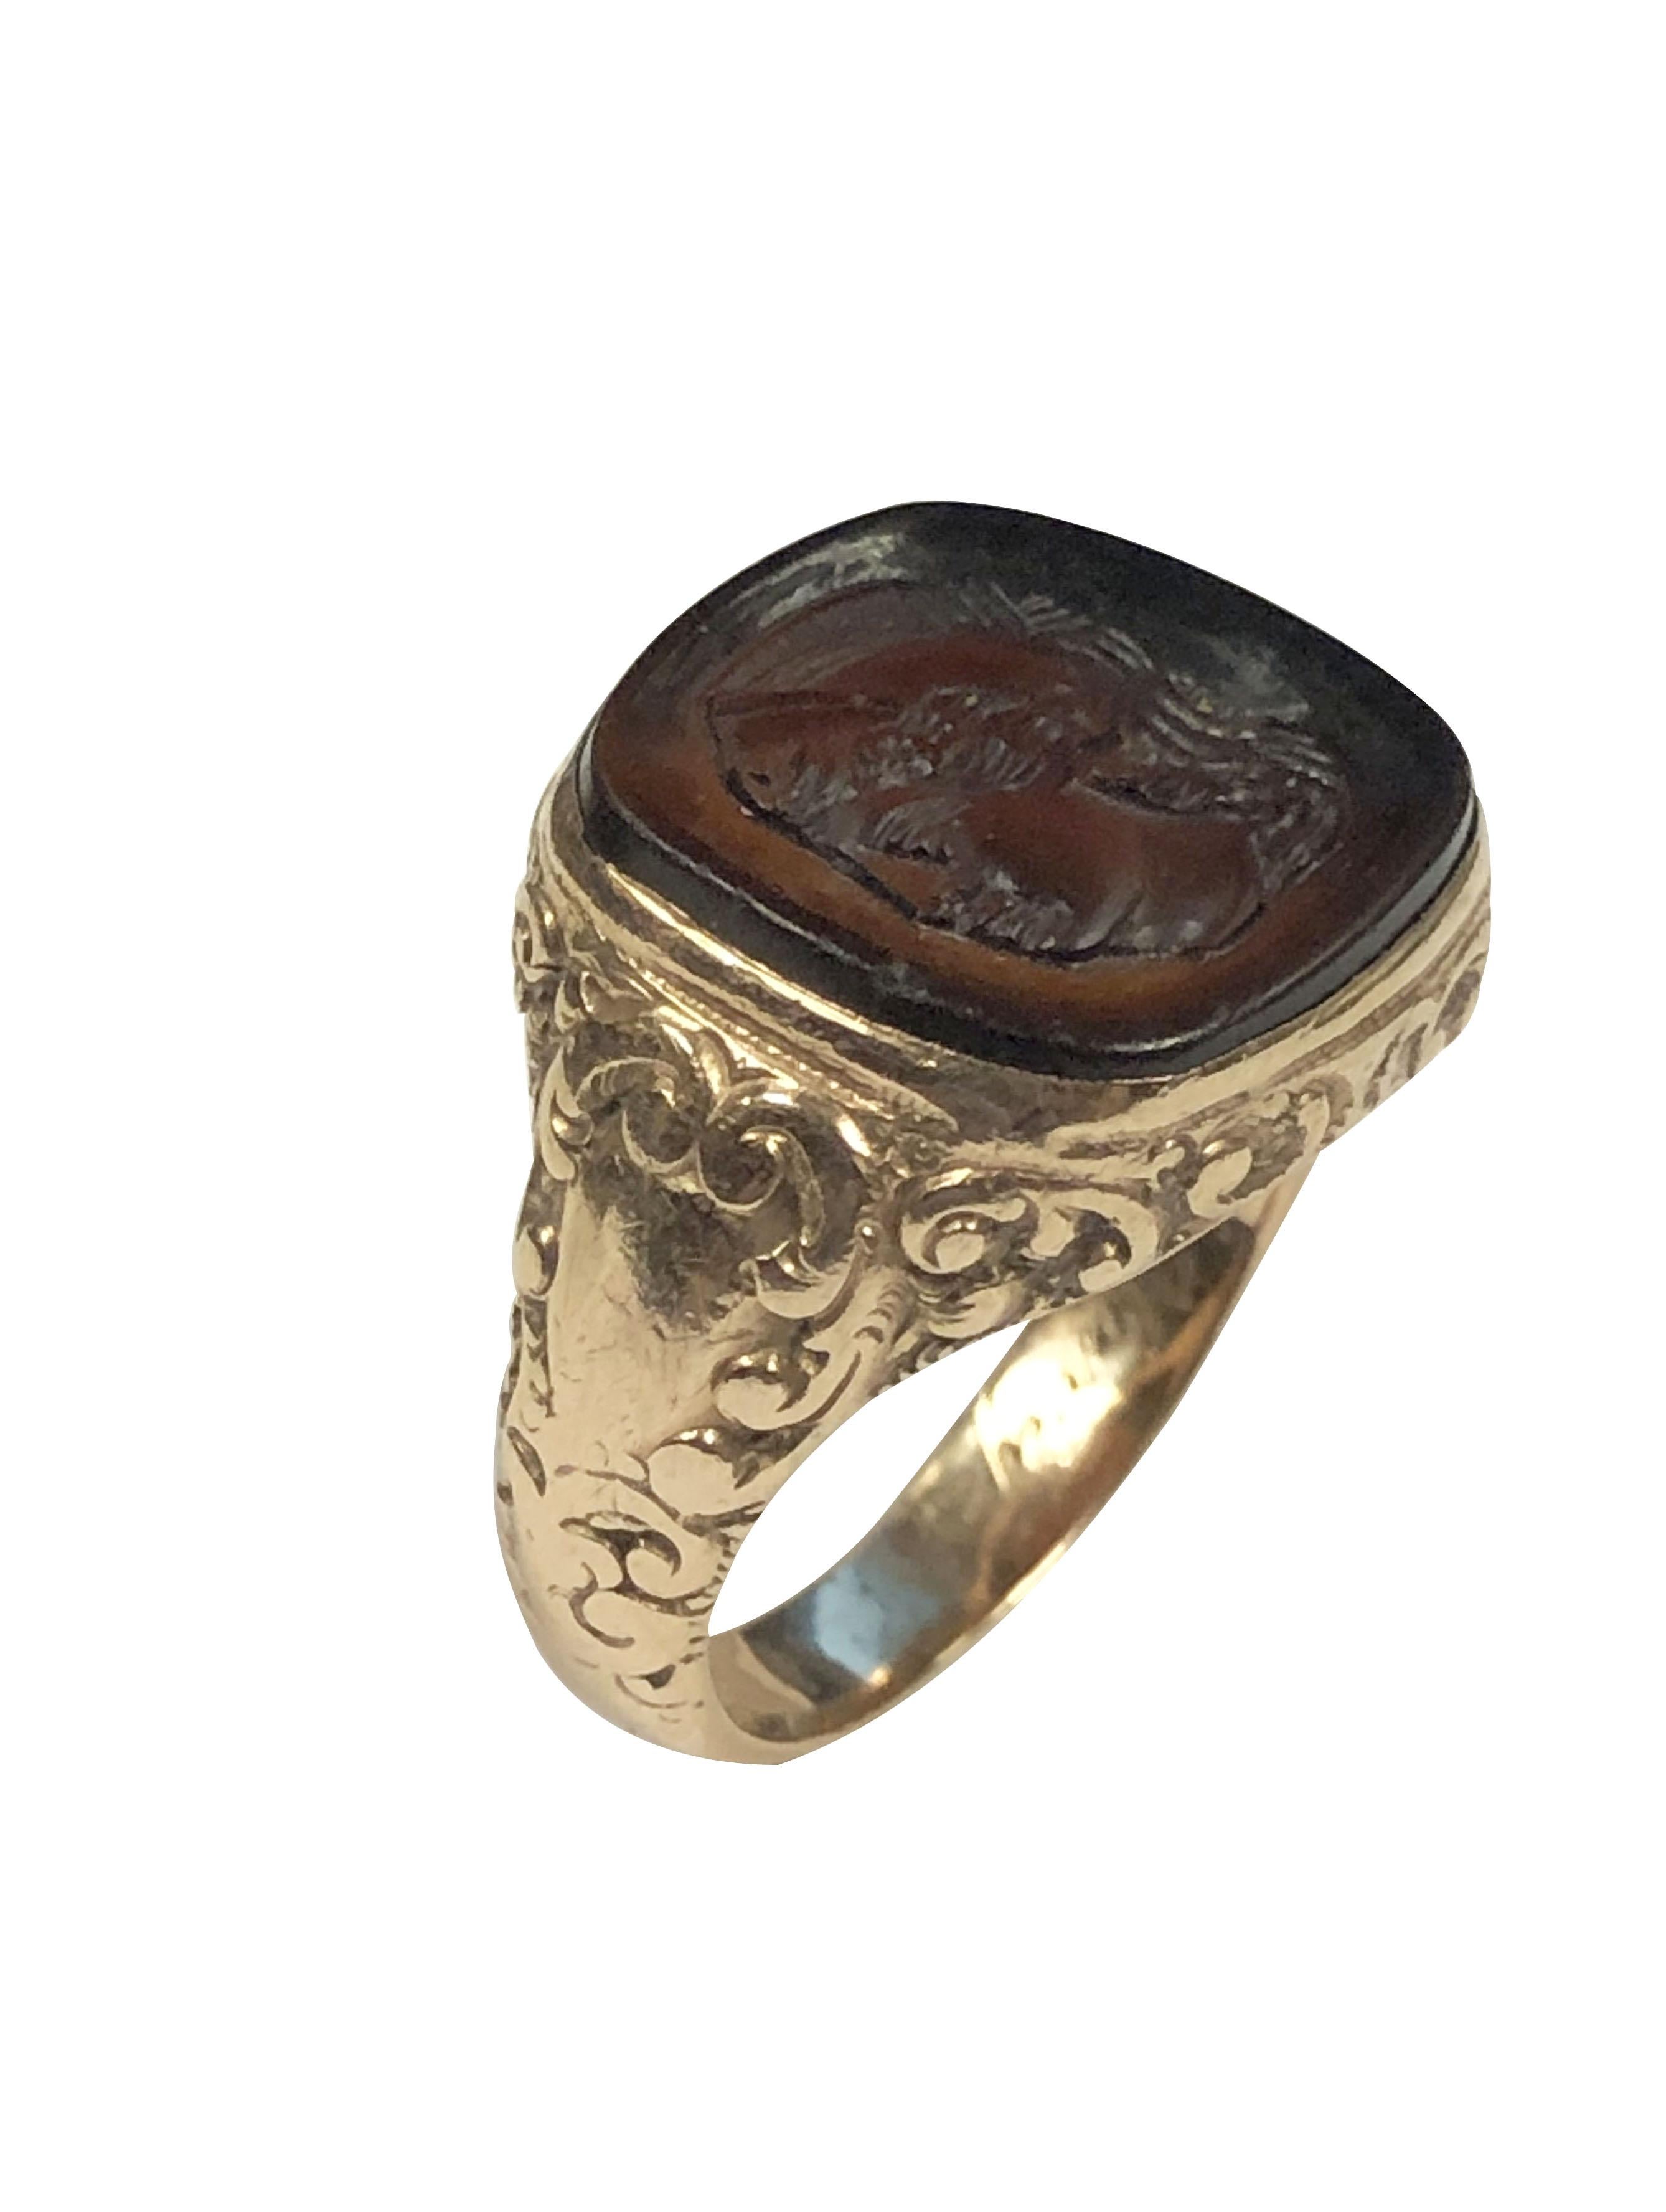 Circa 1910 14k Yellow Gold Intaglio Signet Ring, the top measures 9/16 X  9/16 inch and is set with a dark Red Ancient Greek - Roman style Intaglio. Hand chased design work on the sides of the Ring and an engraved presentation in the ring shank that